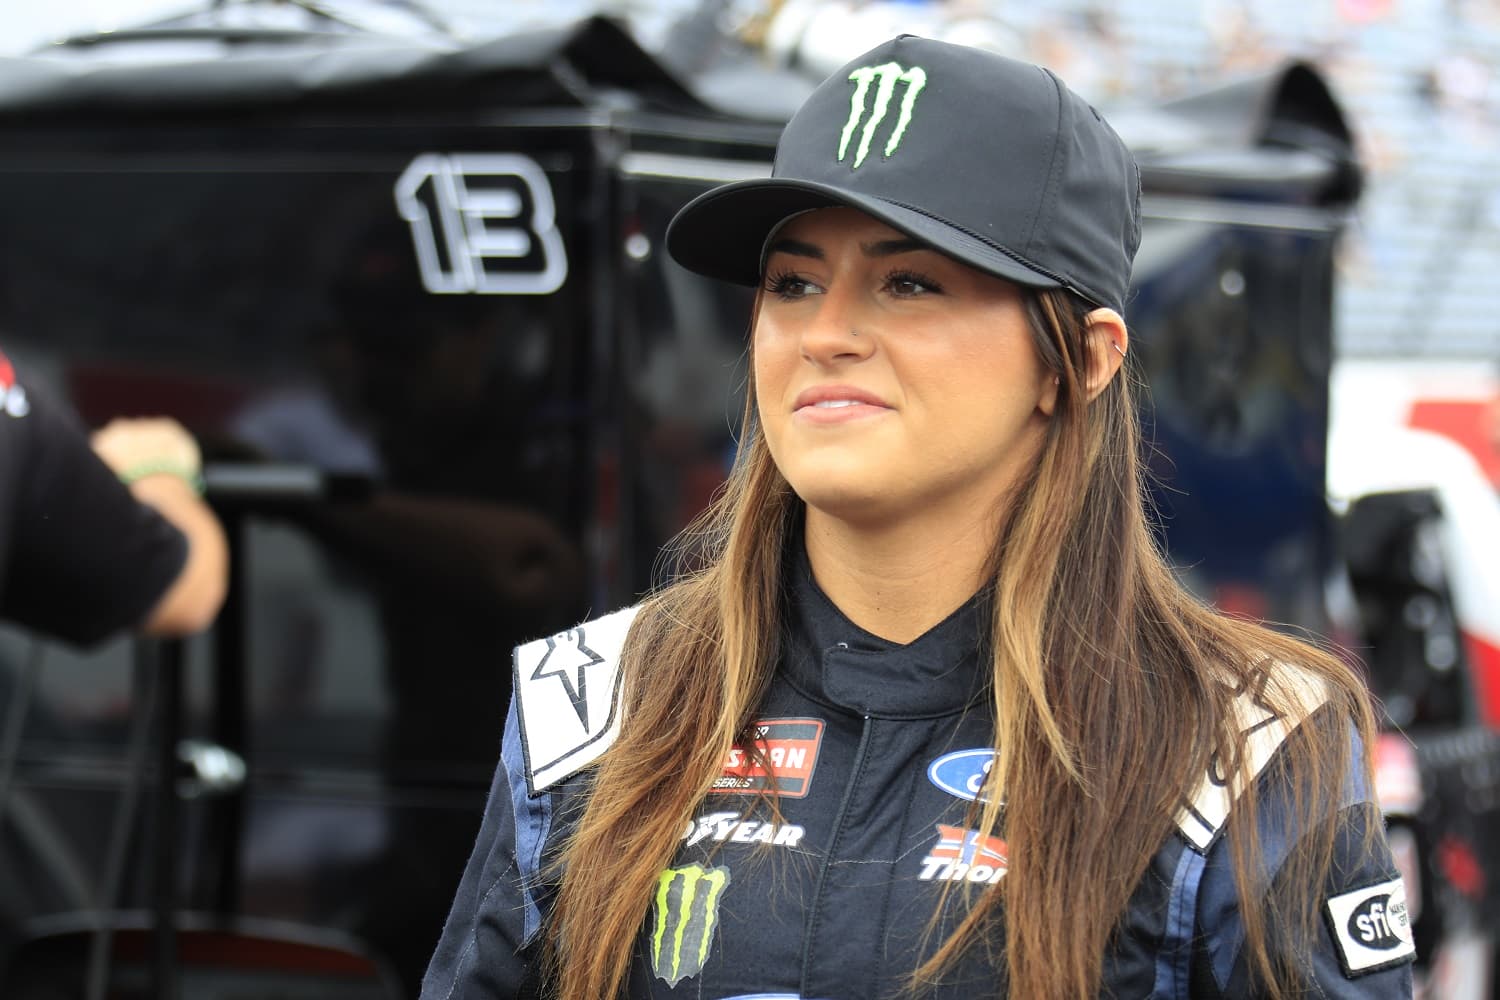 Hailie Deegan looks on prior to the NASCAR Craftsman Truck Series Tyson 250 on May 20, 2023 at North Wilkesboro Speedway. | Jeff Robinson/Icon Sportswire via Getty Images